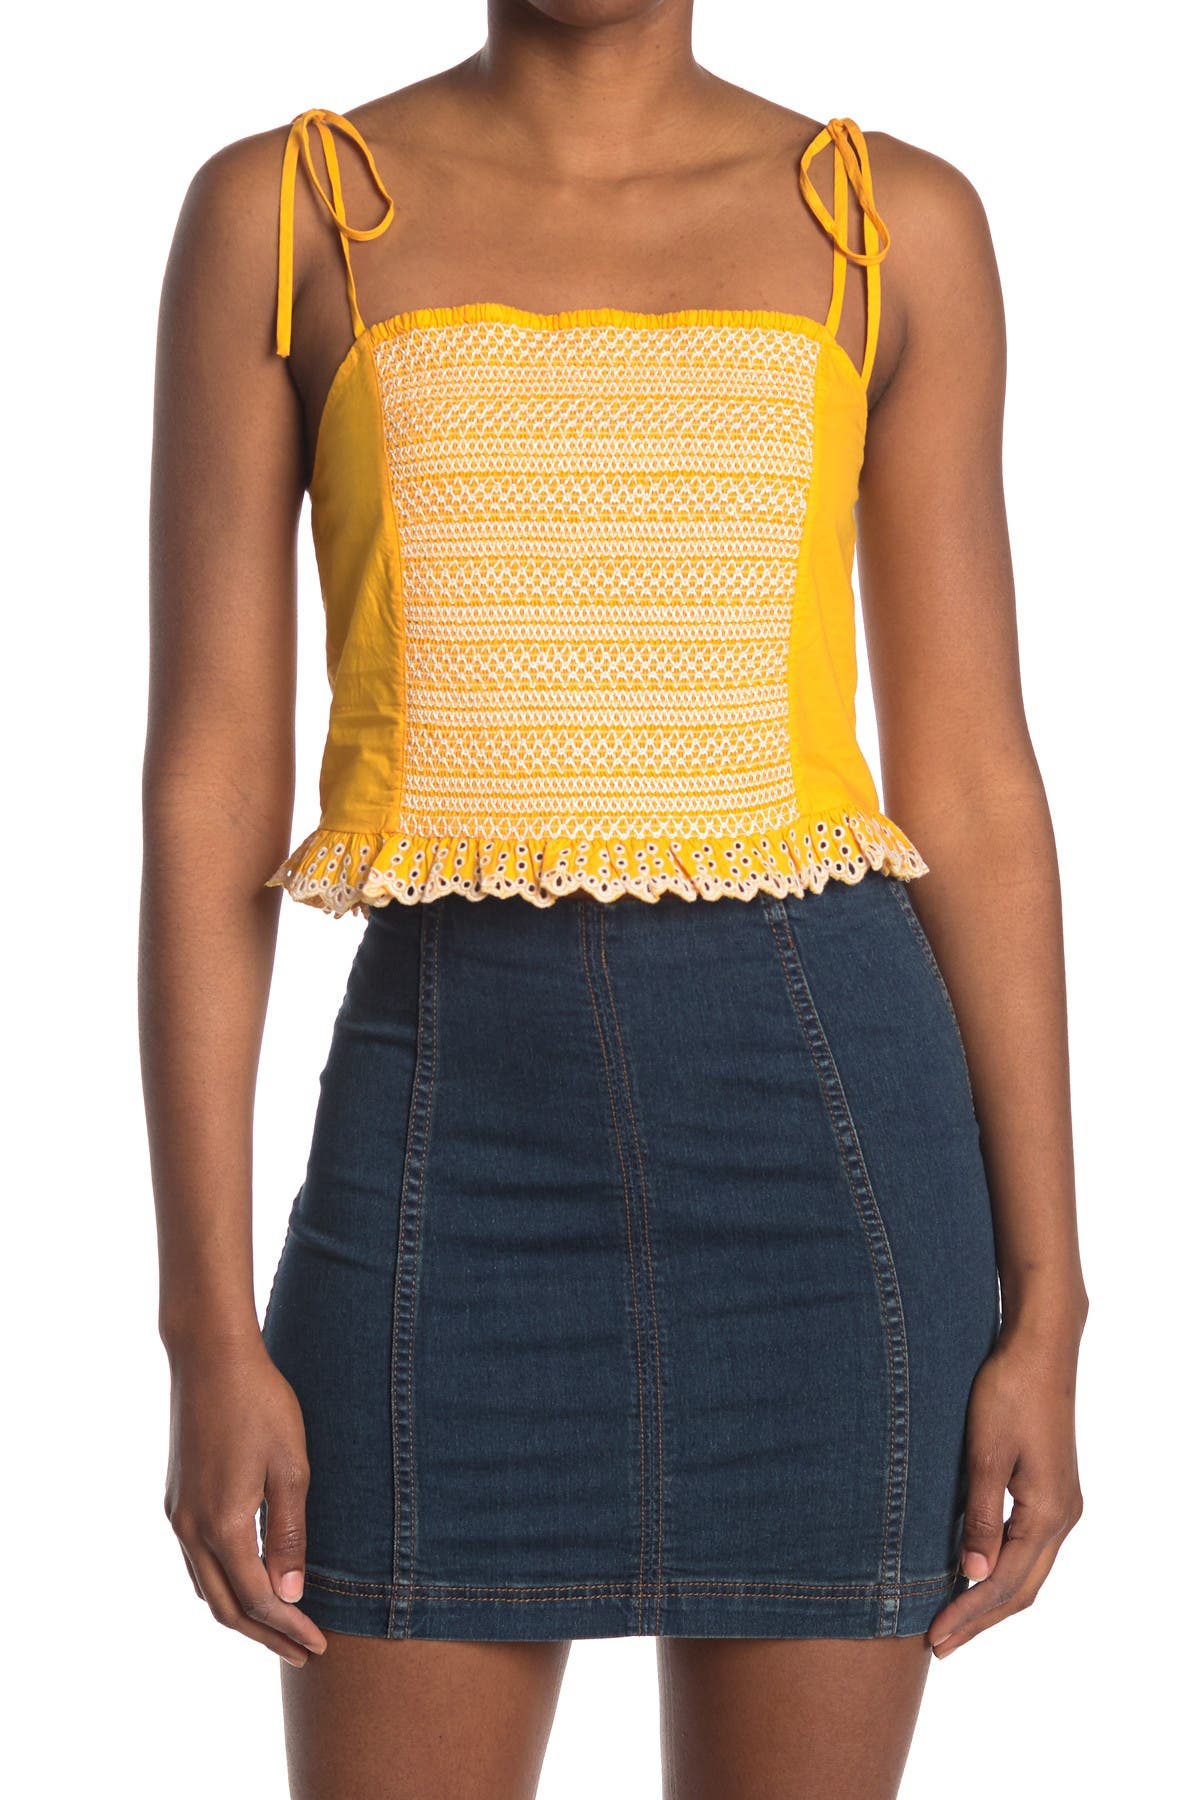 Tanya Taylor Randy Cropped Tie Strap Embroidered Tank In Open Yellow14